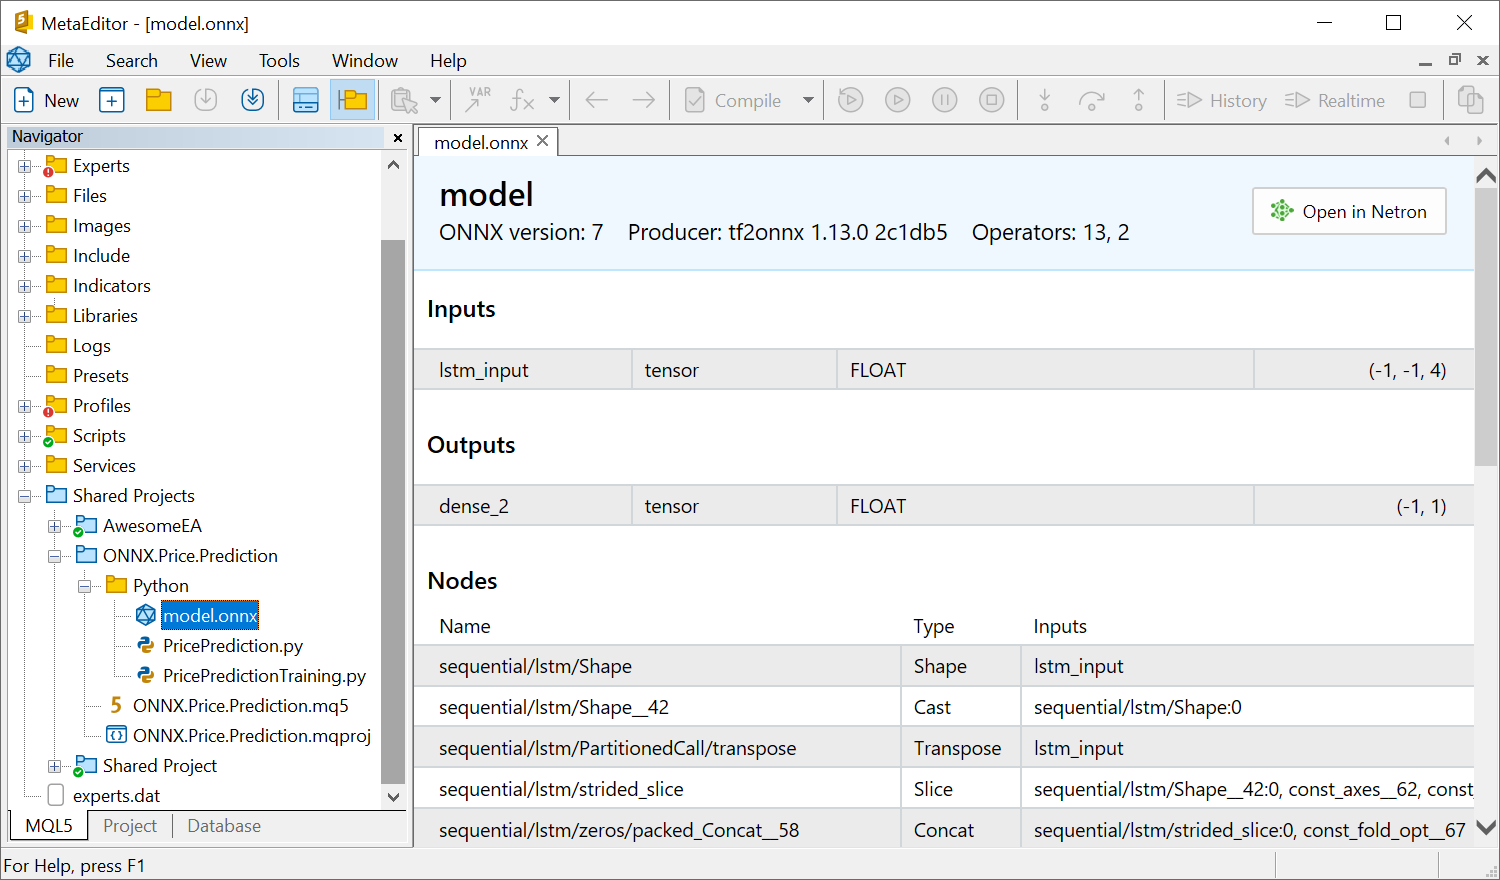 ONNX support has been expanded to display model properties straight in the editor